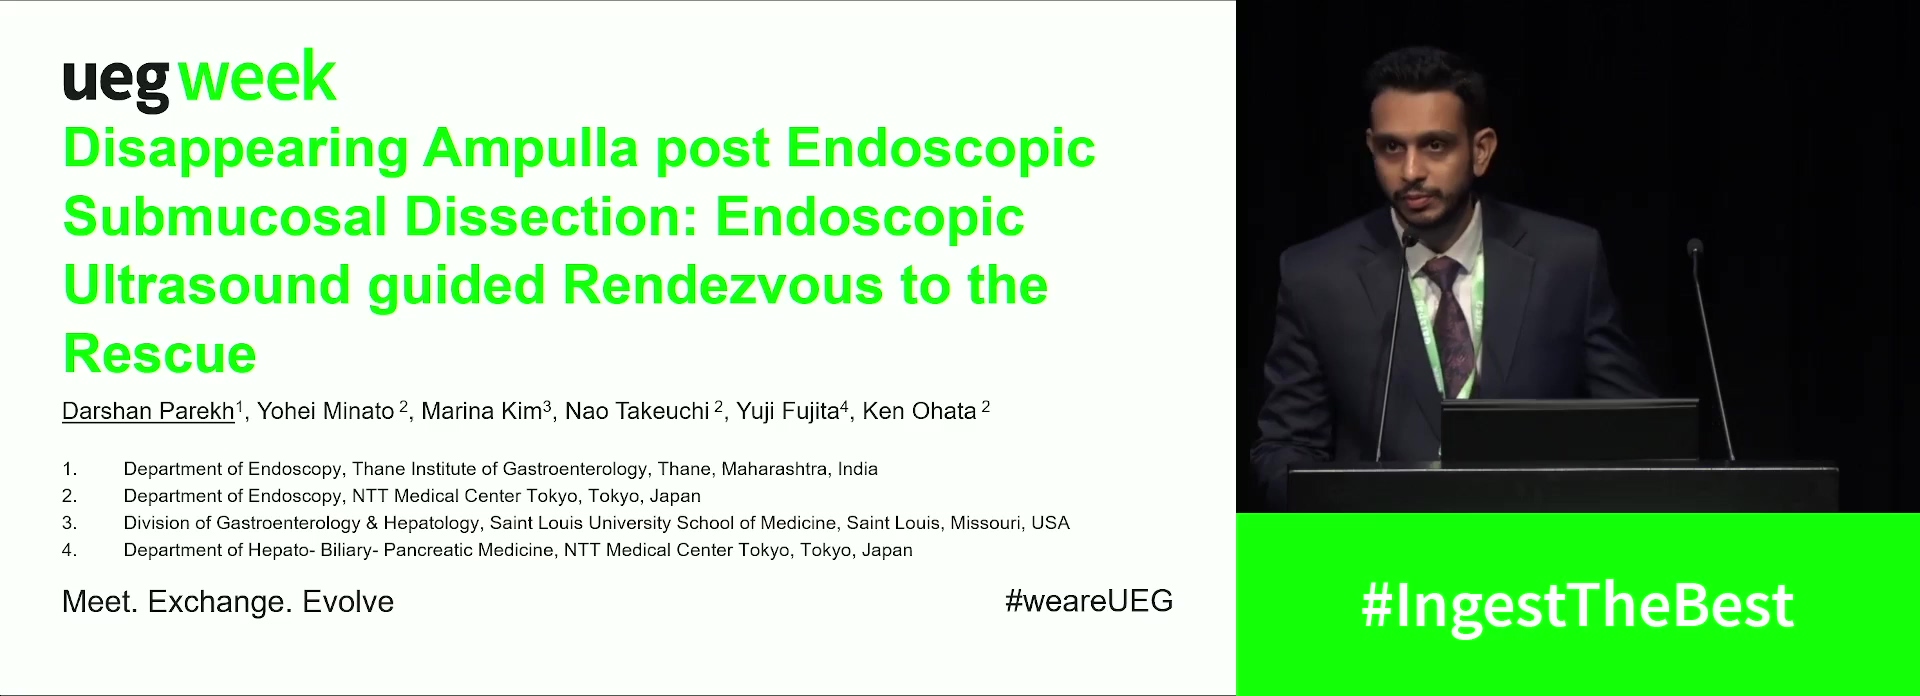 DISAPPEARING AMPULLA POST ENDOSCOPIC SUBMUCOSAL DISSECTION: ENDOSCOPIC ULTRASOUND GUIDED RENDEZVOUS TO THE RESCUE